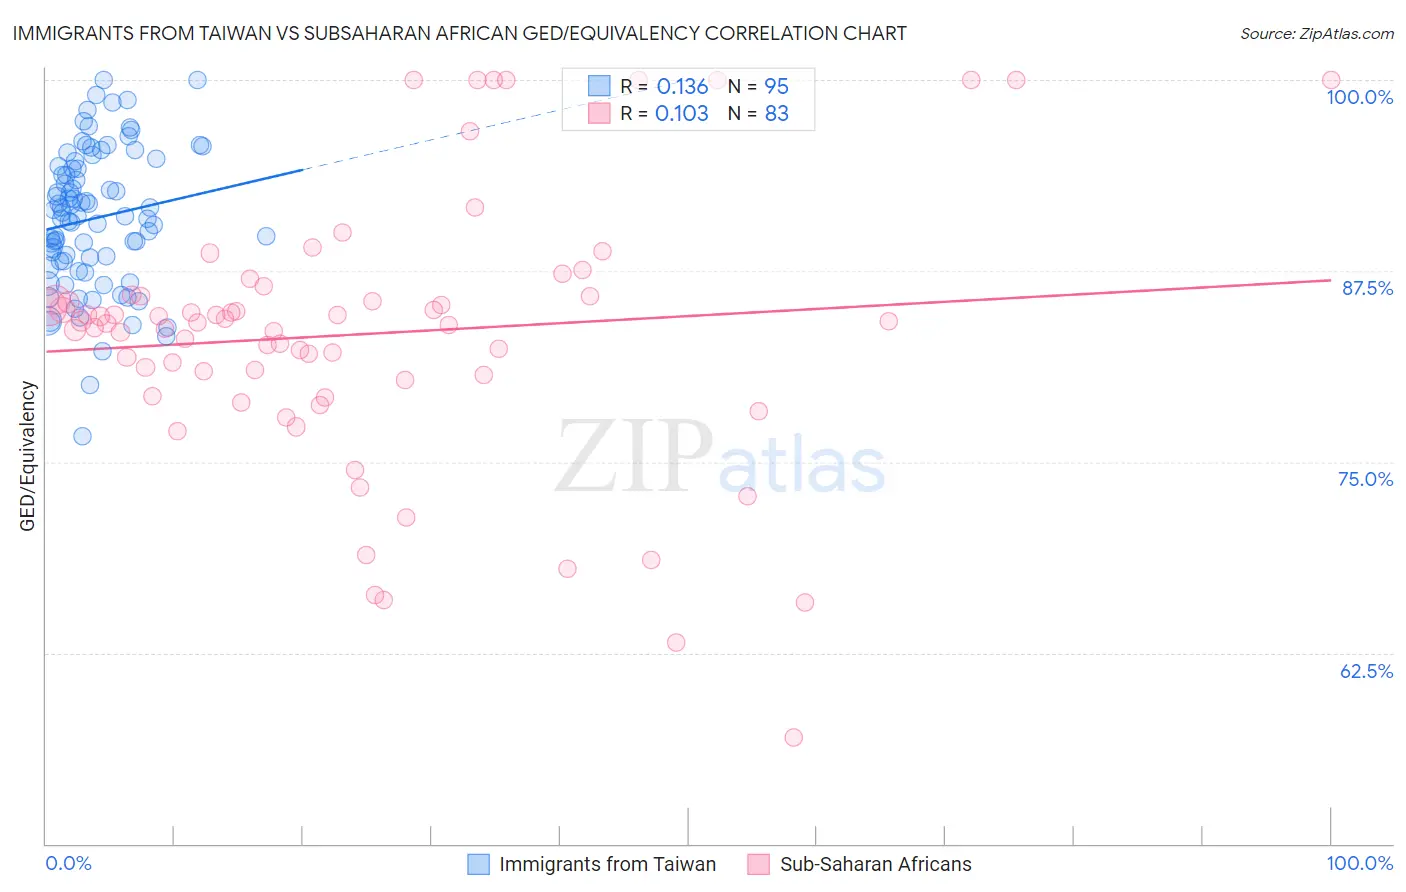 Immigrants from Taiwan vs Subsaharan African GED/Equivalency